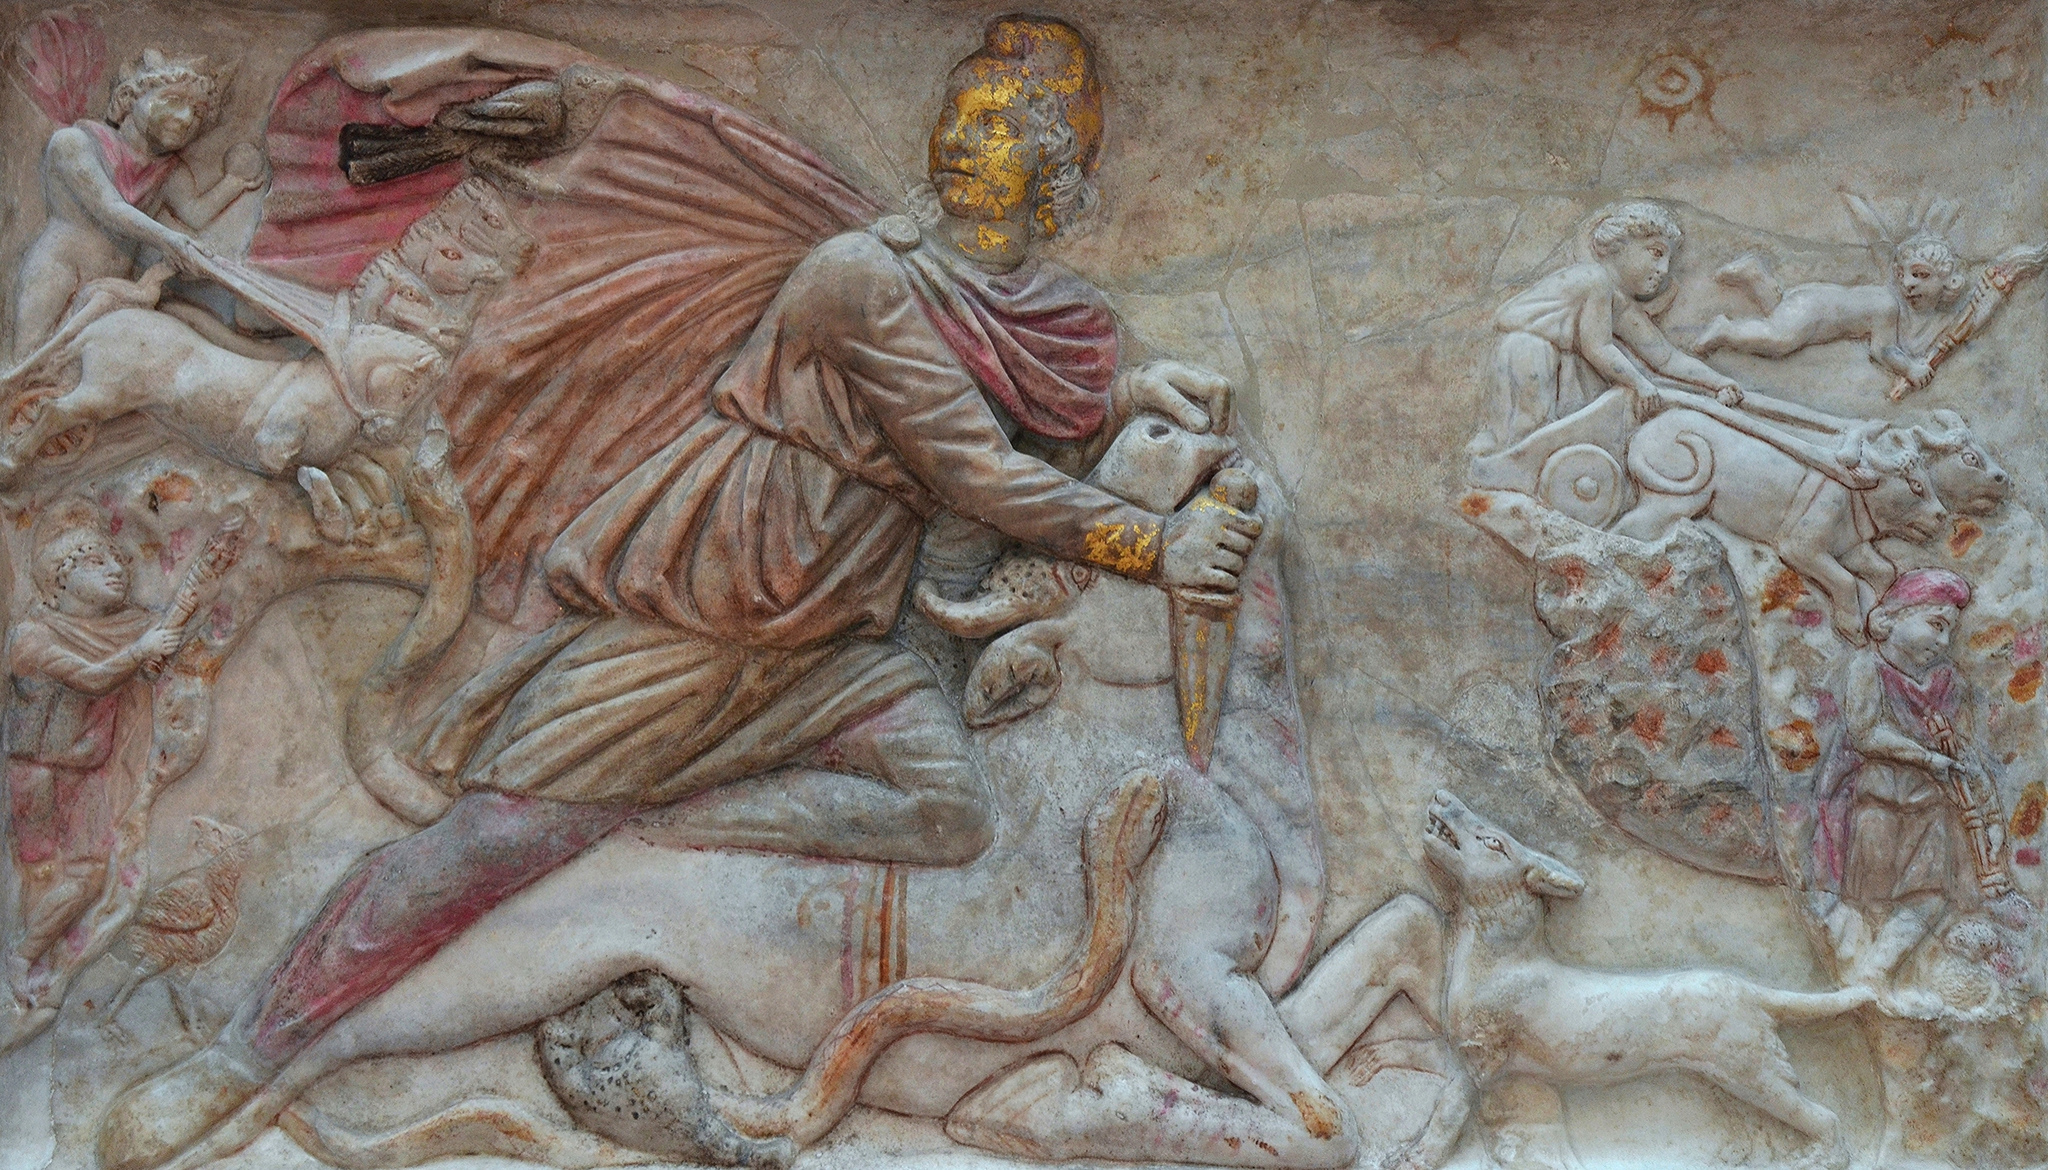 Large polychrome tauroctony relief, from the mithraeum of S. Stefano Rotondo